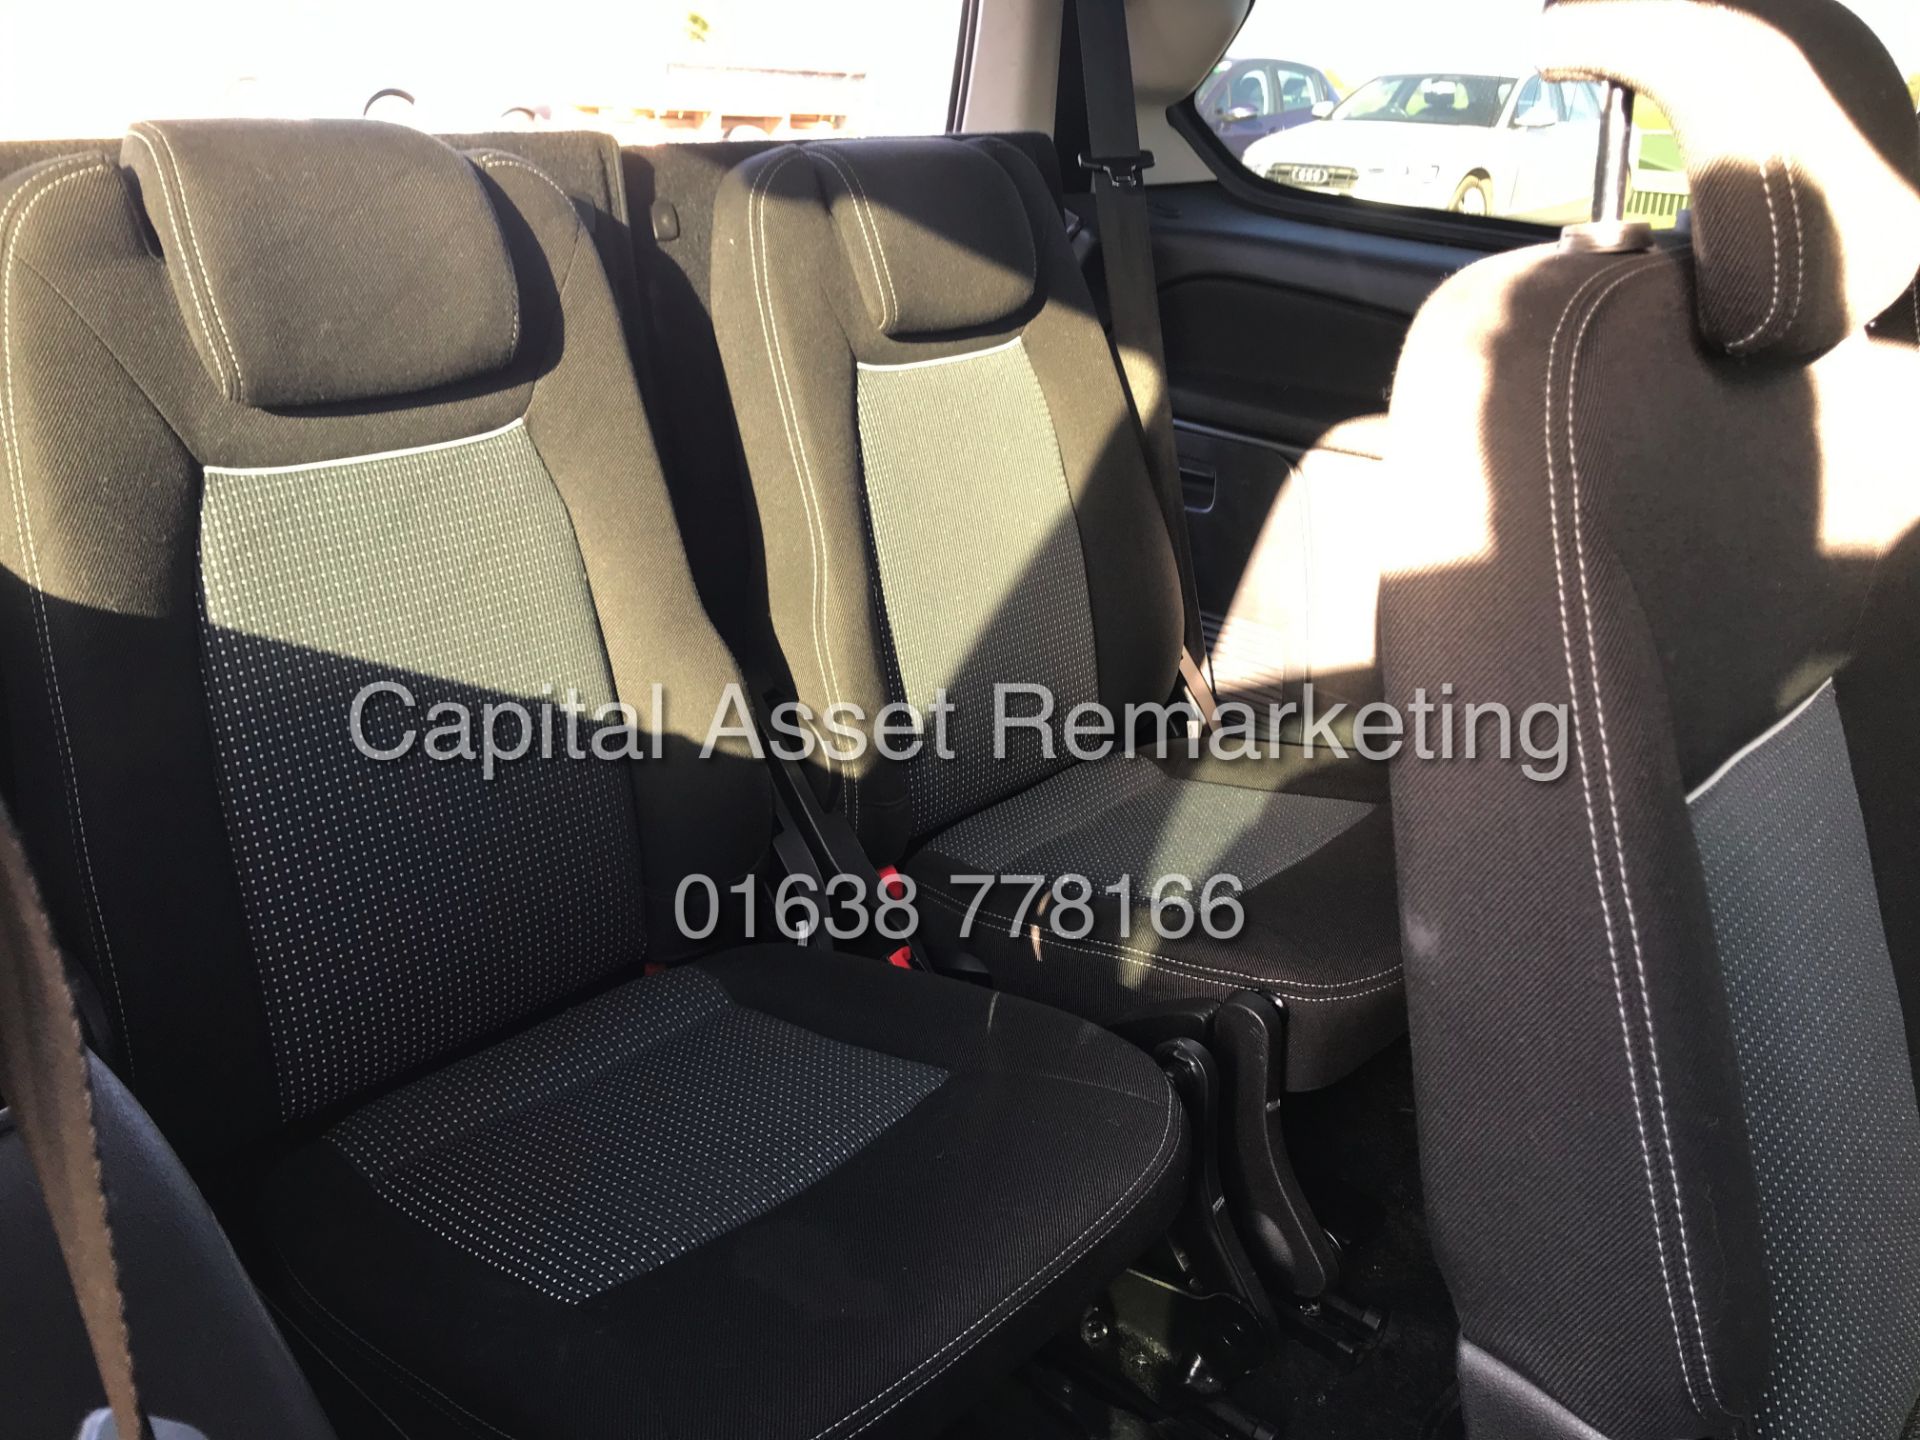 On Sale FORD GALAXY 2.0TDCI "ZETEC - POWERSHIFT" 7 SEATER (15 REG) AIR CON - 1 OWNER - 140BHP ENGINE - Image 10 of 17